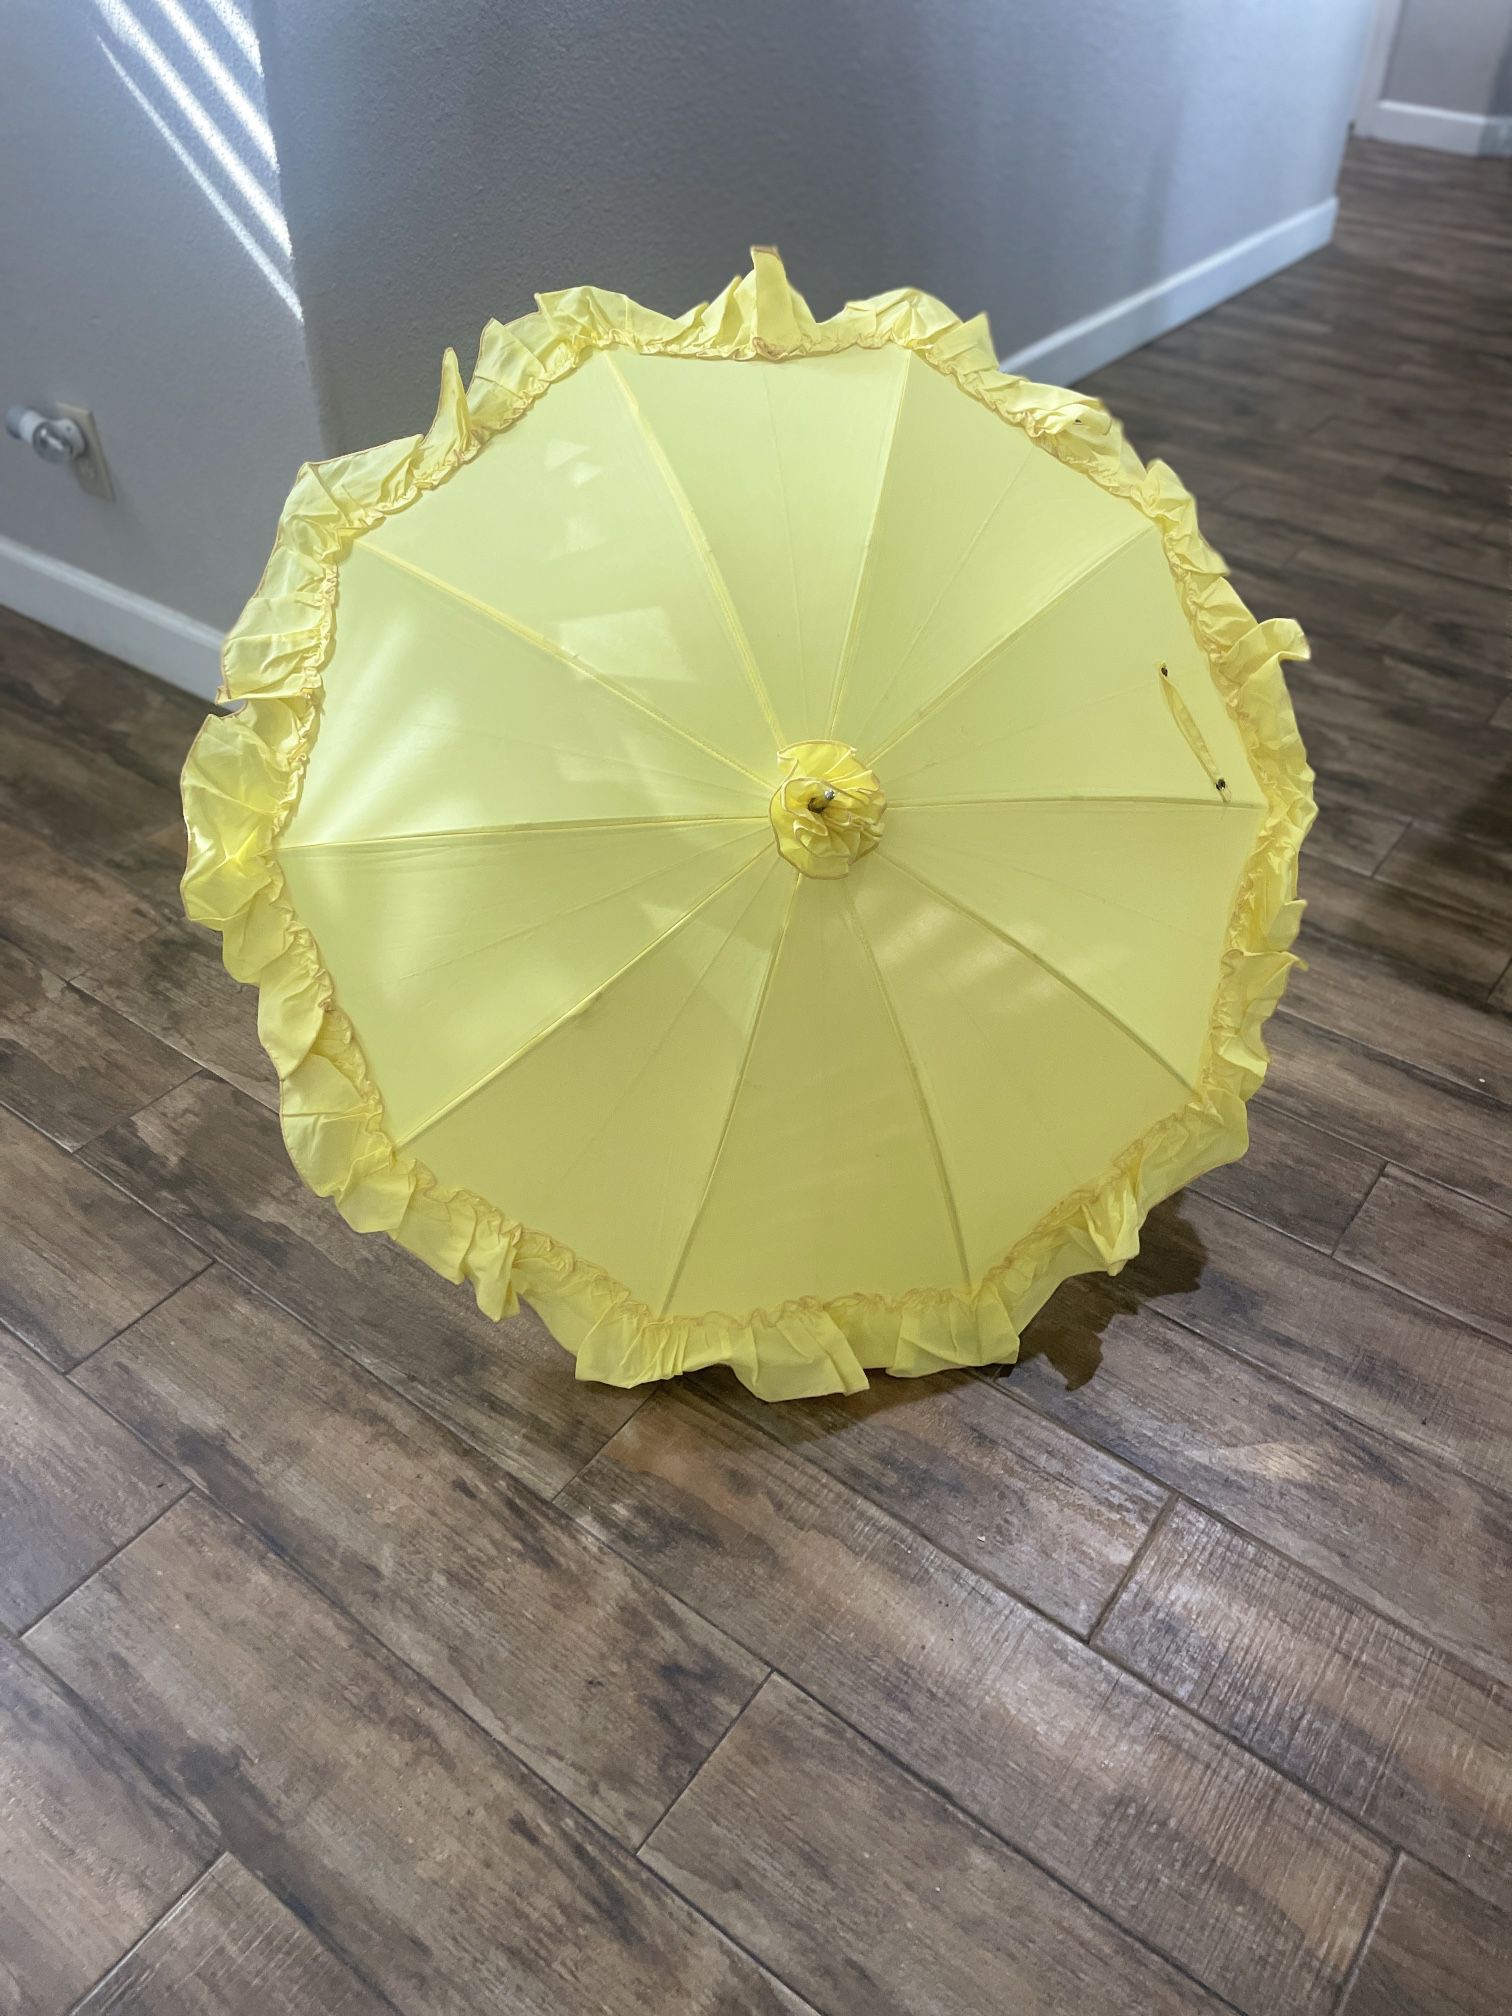 Vintage 1960’s Louis Vuitton Umbrella Made In France for Sale in Ontario,  CA - OfferUp